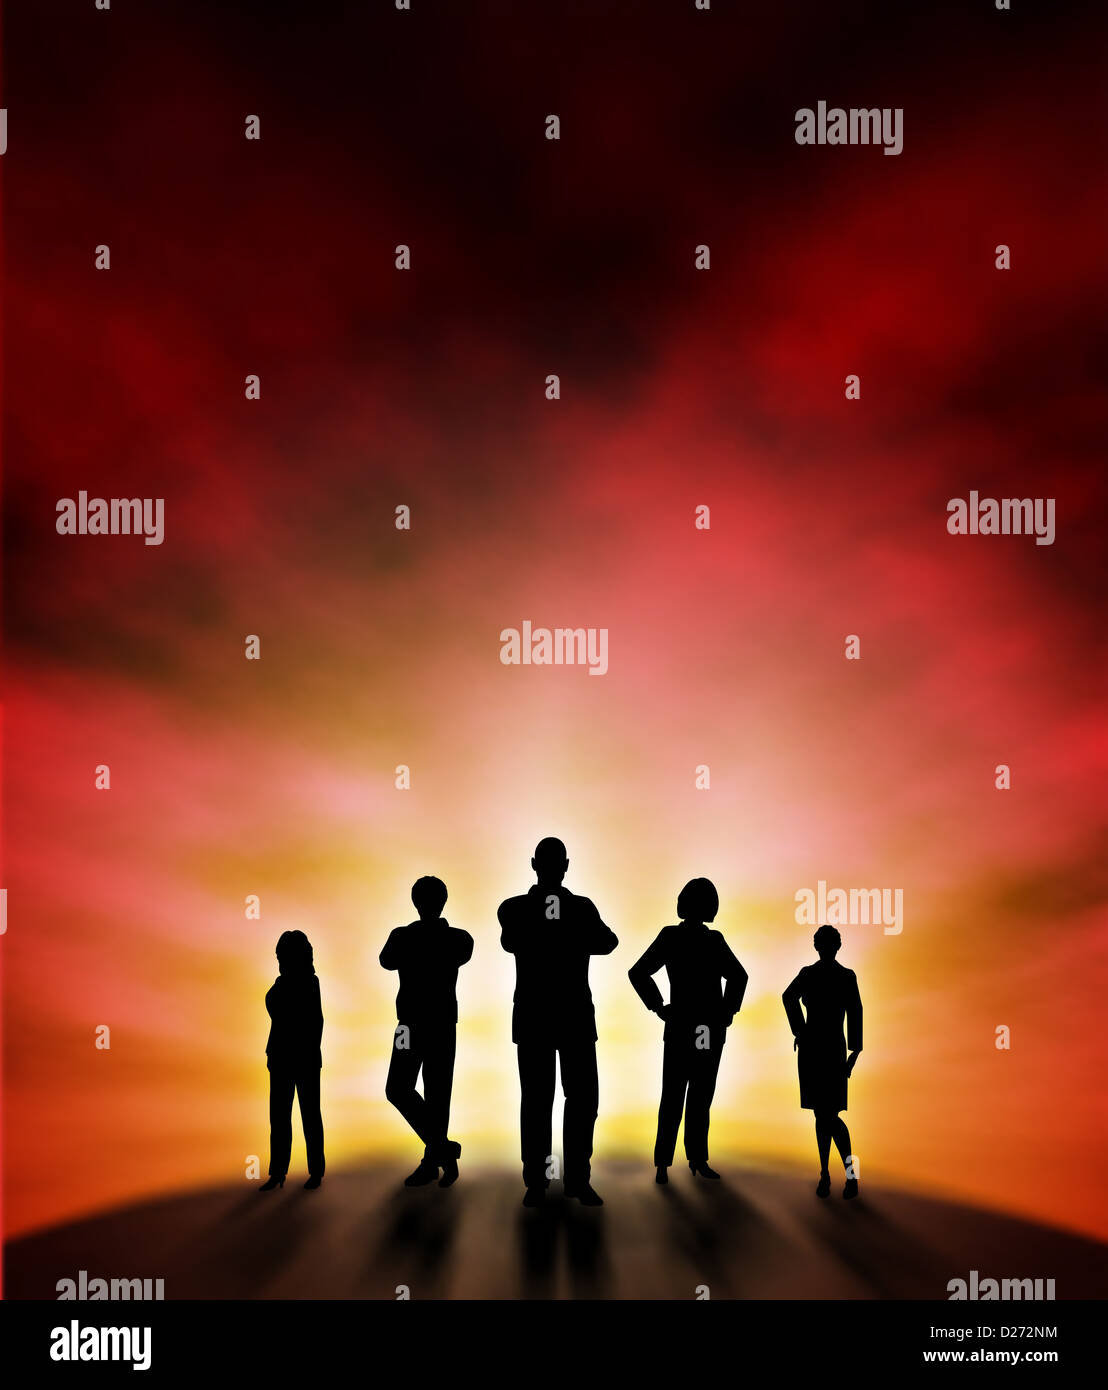 Illustration of a business team silhouette standing at a new dawn Stock Photo